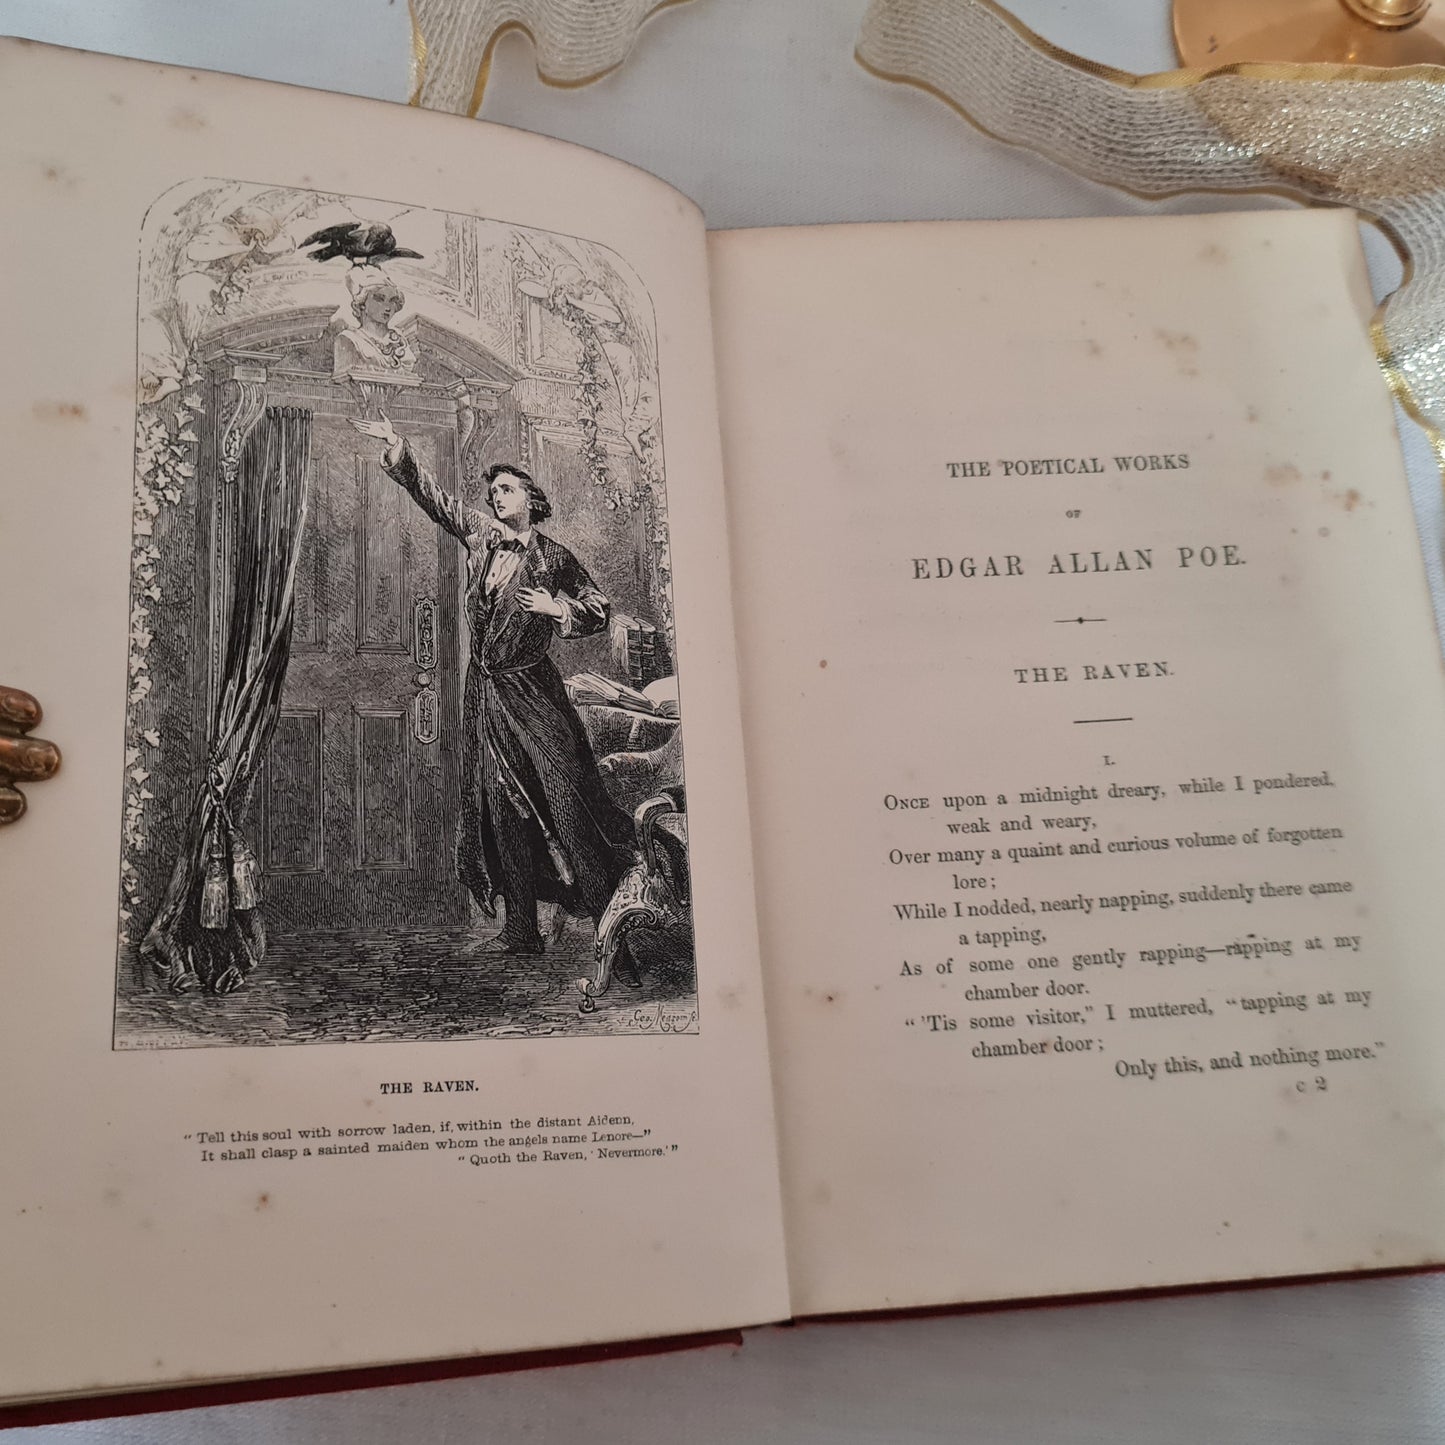 1852 The Poetical Works of Edgar Allan Poe / Extremely Early Edition / J. & C. Brown, London / Richly Illustrated Antique / Good Condition